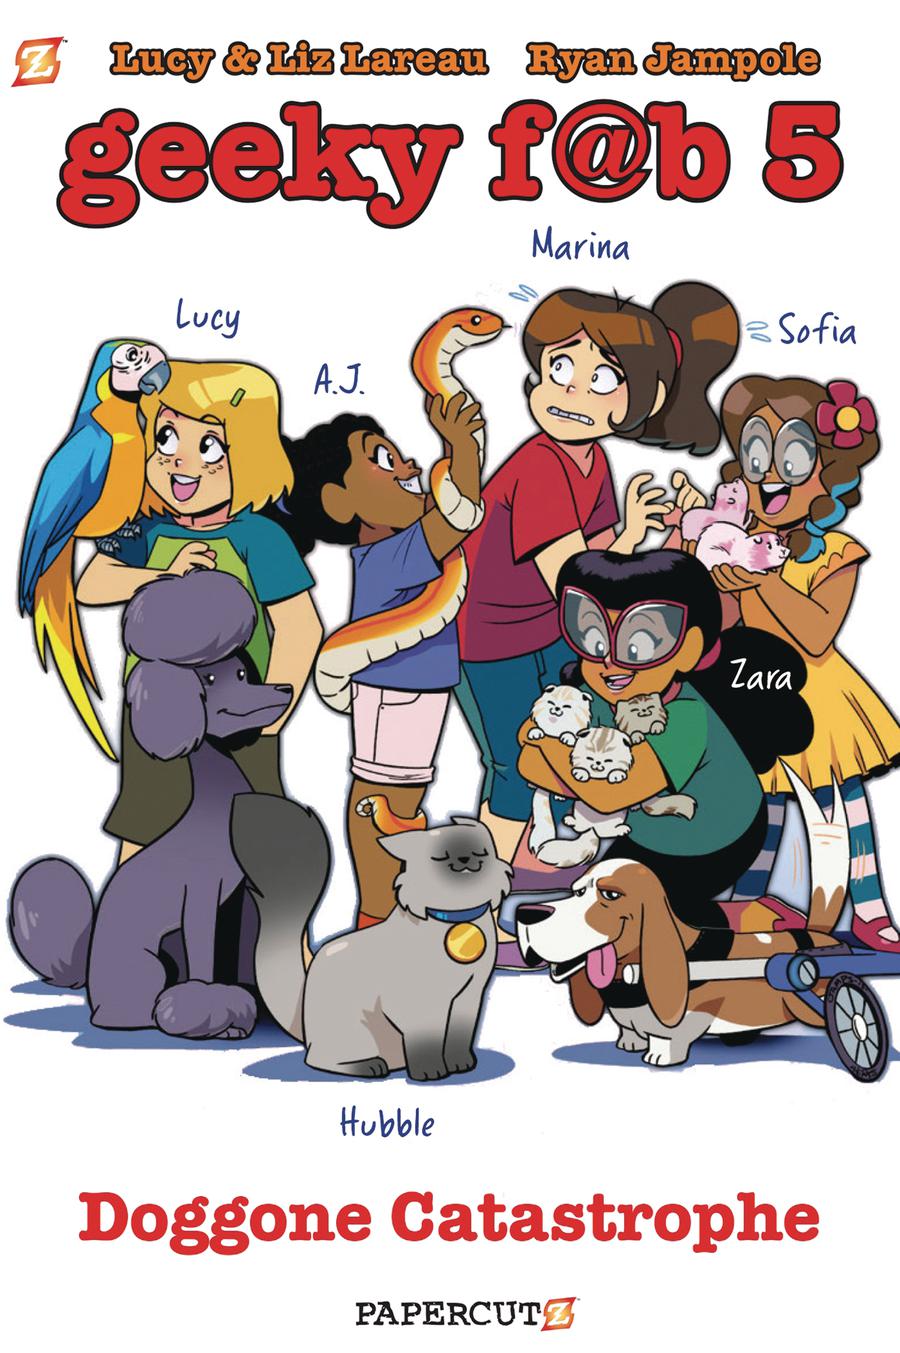 Geeky Fab Five Vol 3 Doggone Catastrophe TP